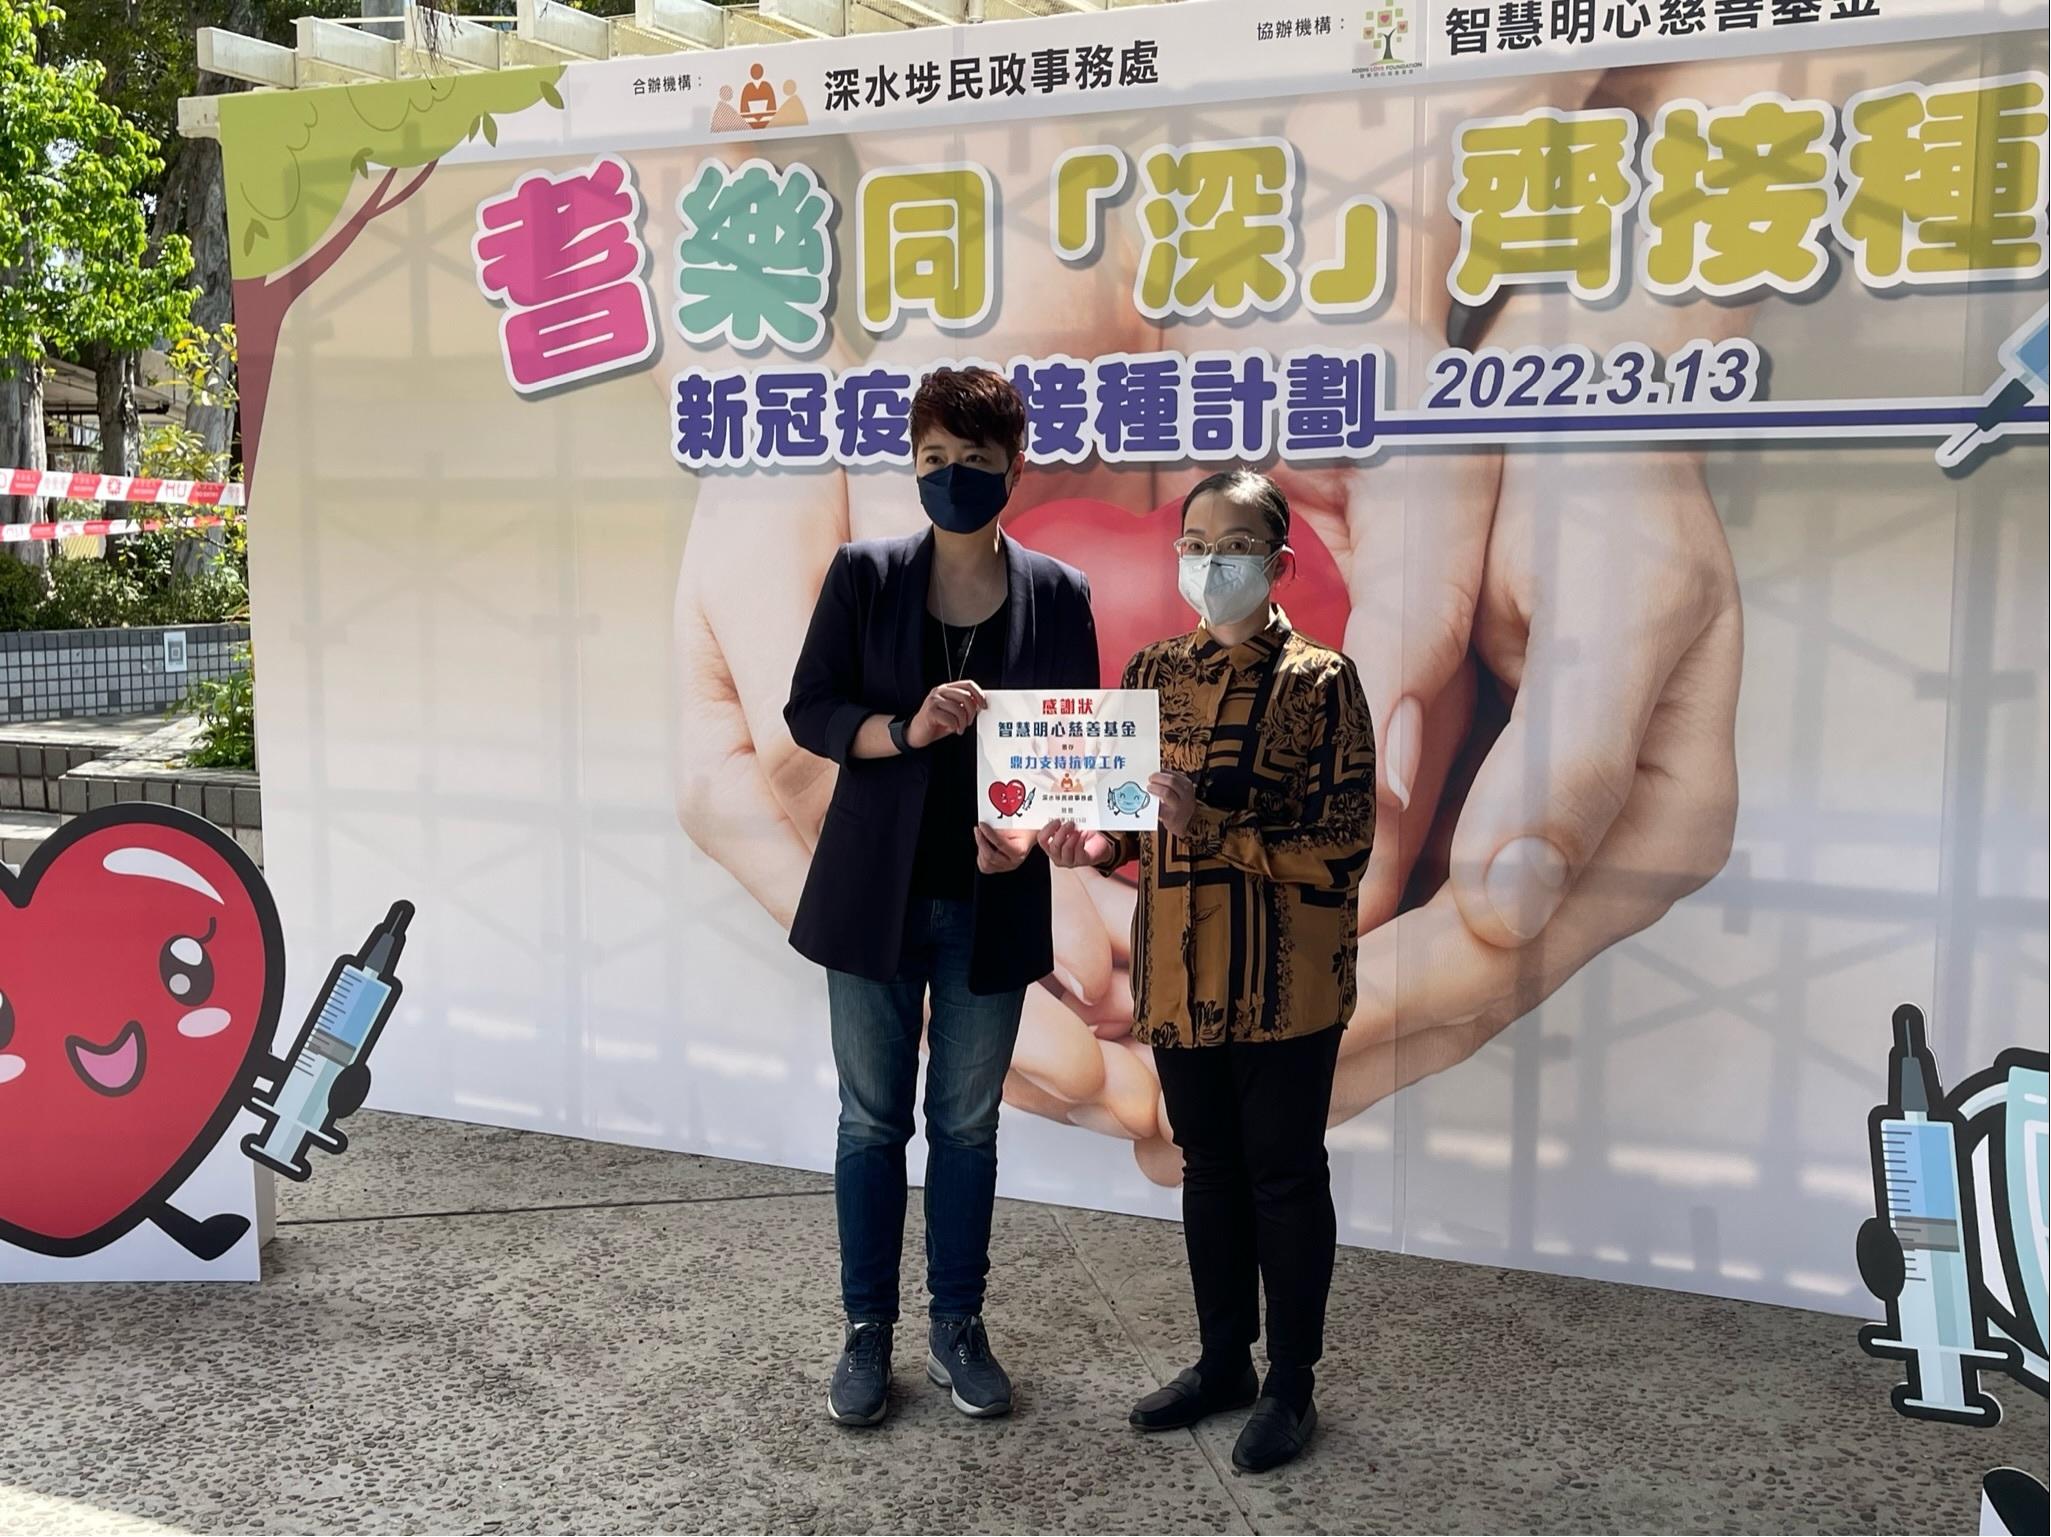 The Acting Director of Home Affairs, Miss Vega Wong, officiated at the launch ceremony of a community vaccination programme for the elderly named "Vaccination for the Elderly in SSP" organised by the Sham Shui Po District Office held in Chak On Estate today (March 13).  Photo shows Miss Wong (right) presenting a certificate of appreciation to the Director of Bodhi Love Foundation Limited, Miss Jeannie Chu, to express gratitude to their unwavering support to the community.